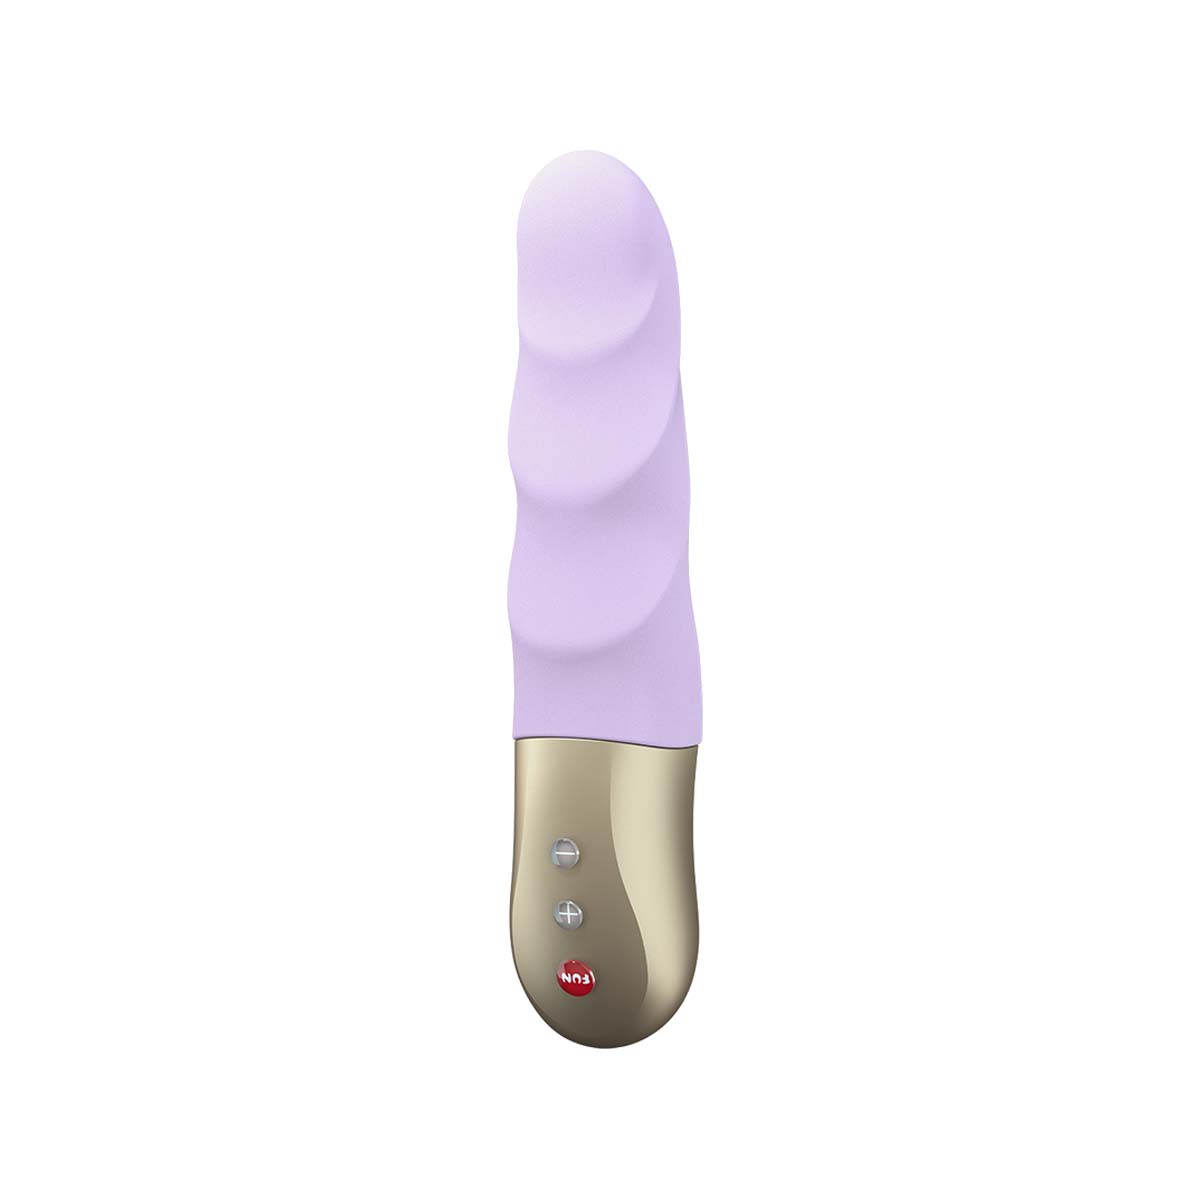 Lilac silicone thrusting vibrator with ridges for deep massage and golden handle with three buttons Nudie Co